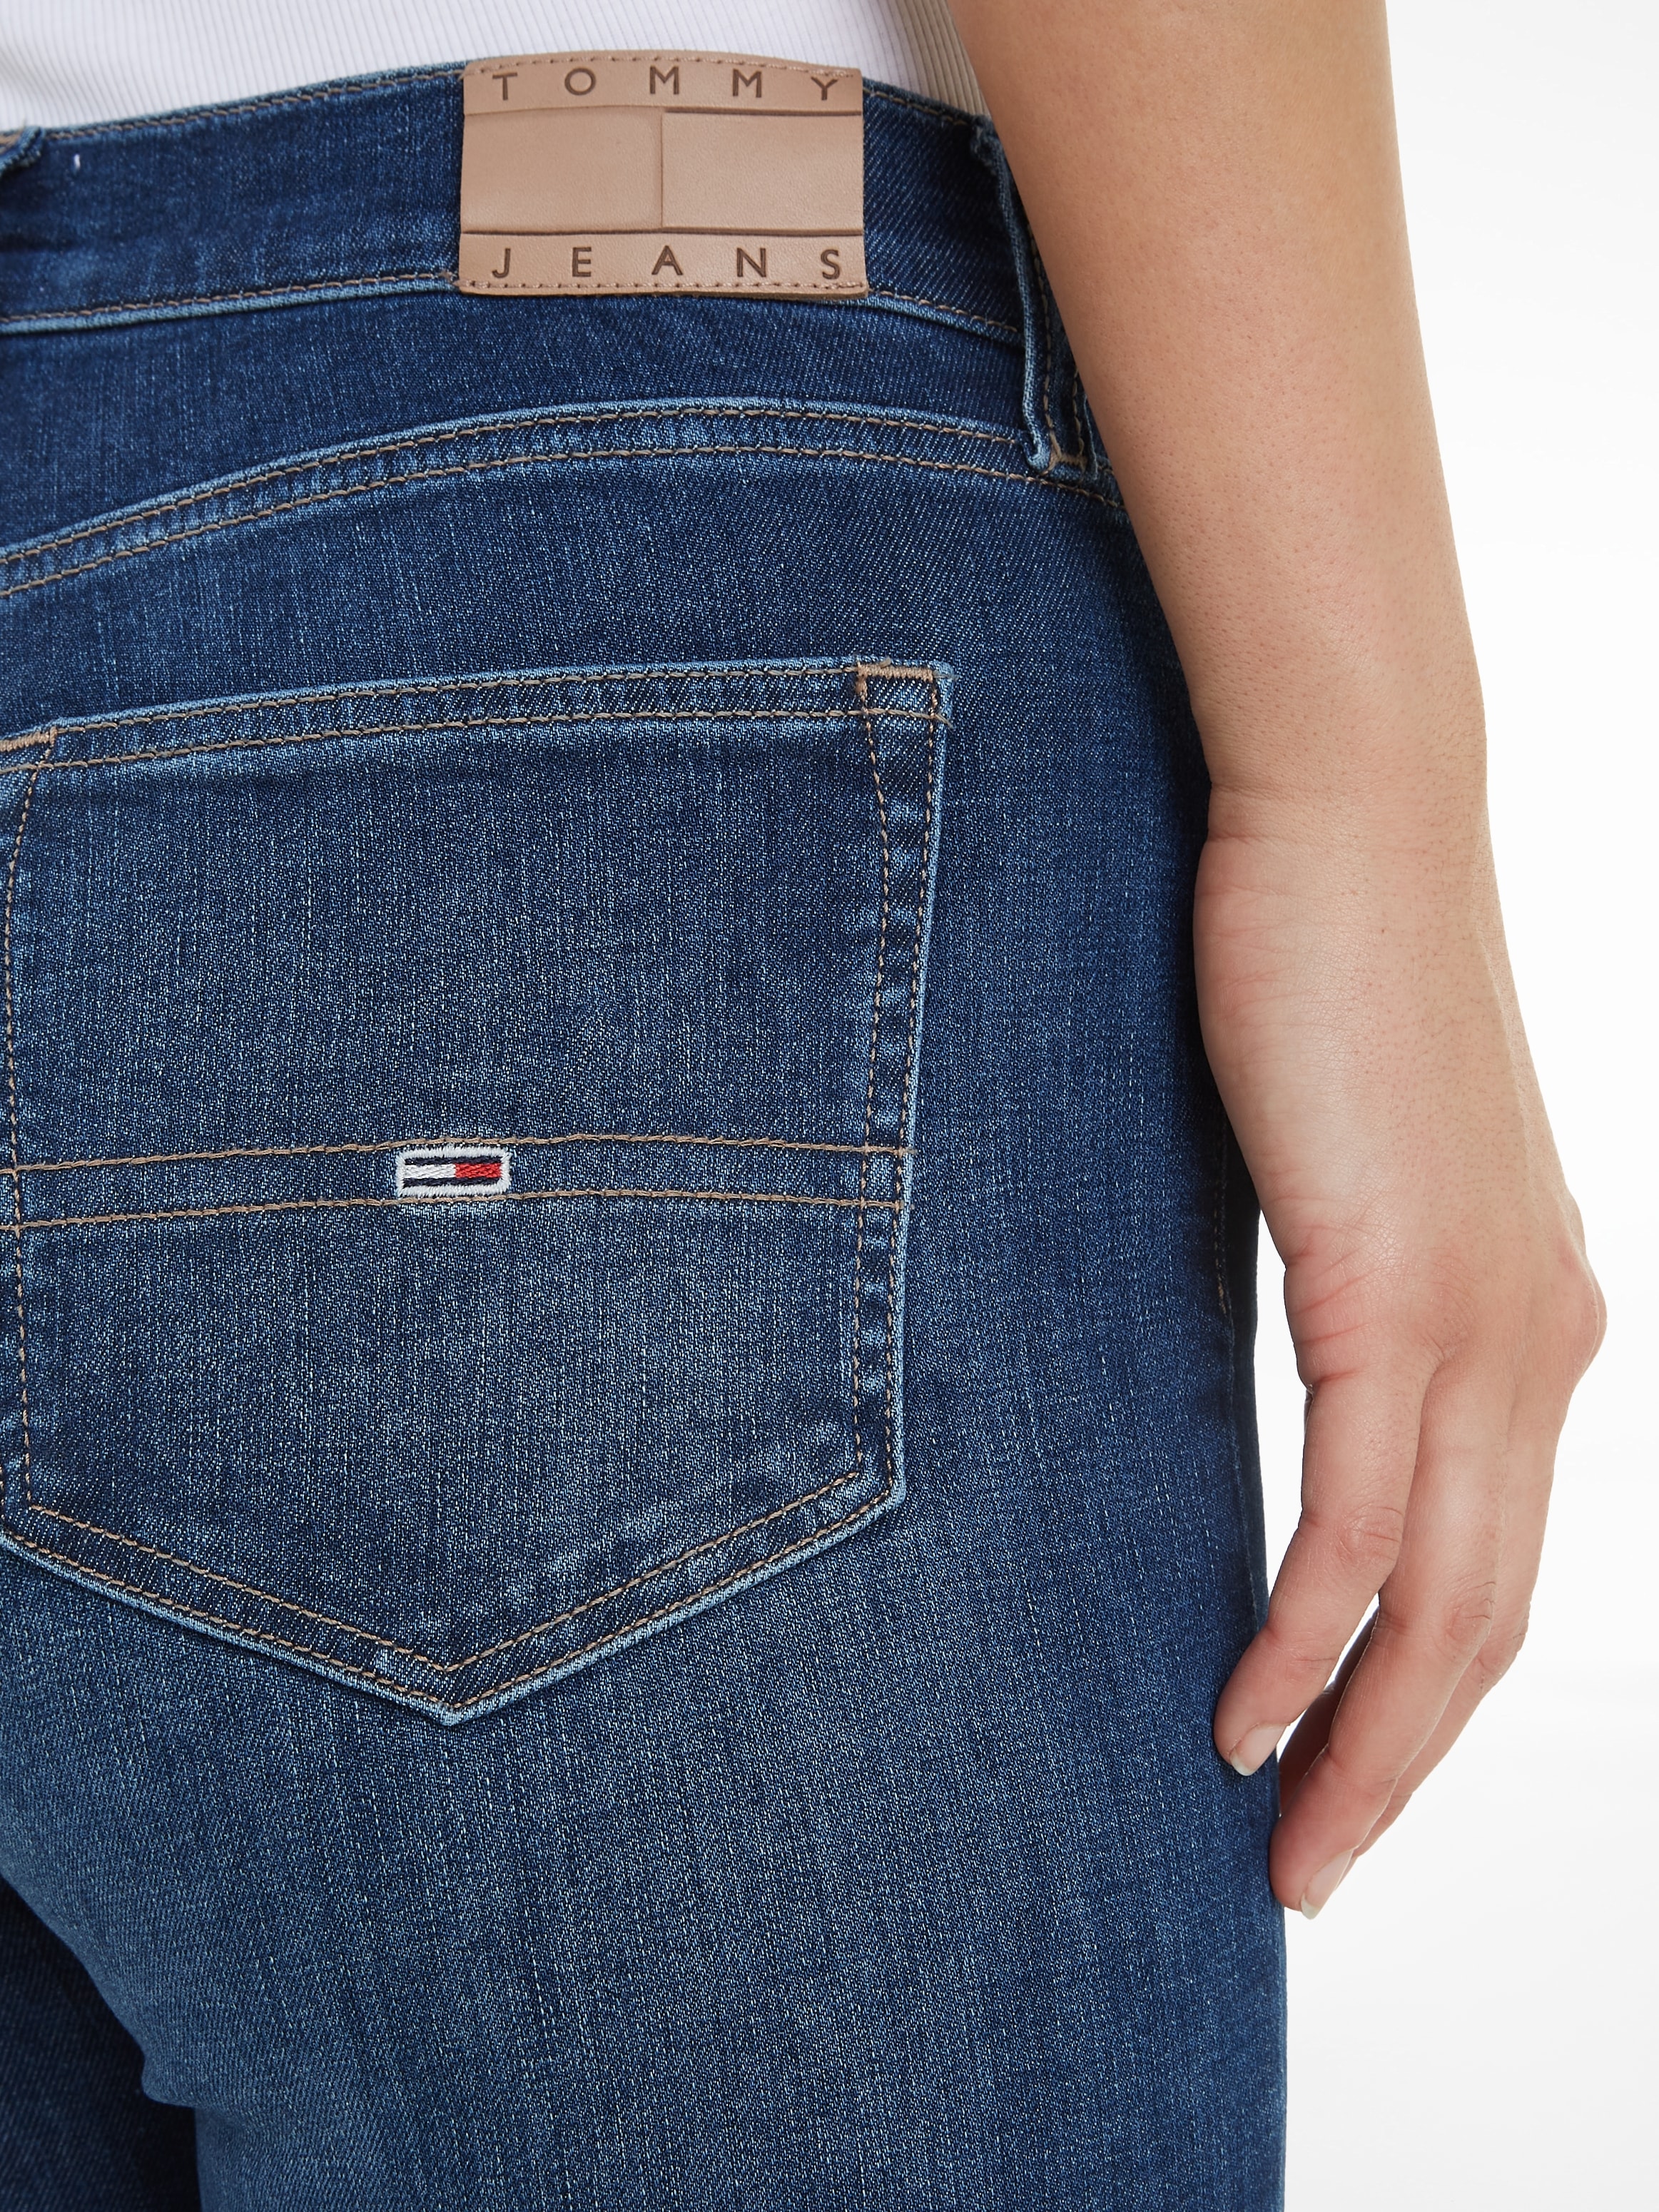 Jeans ♕ Bequeme Markenlabel Tommy bei »Sylvia«, mit Jeans